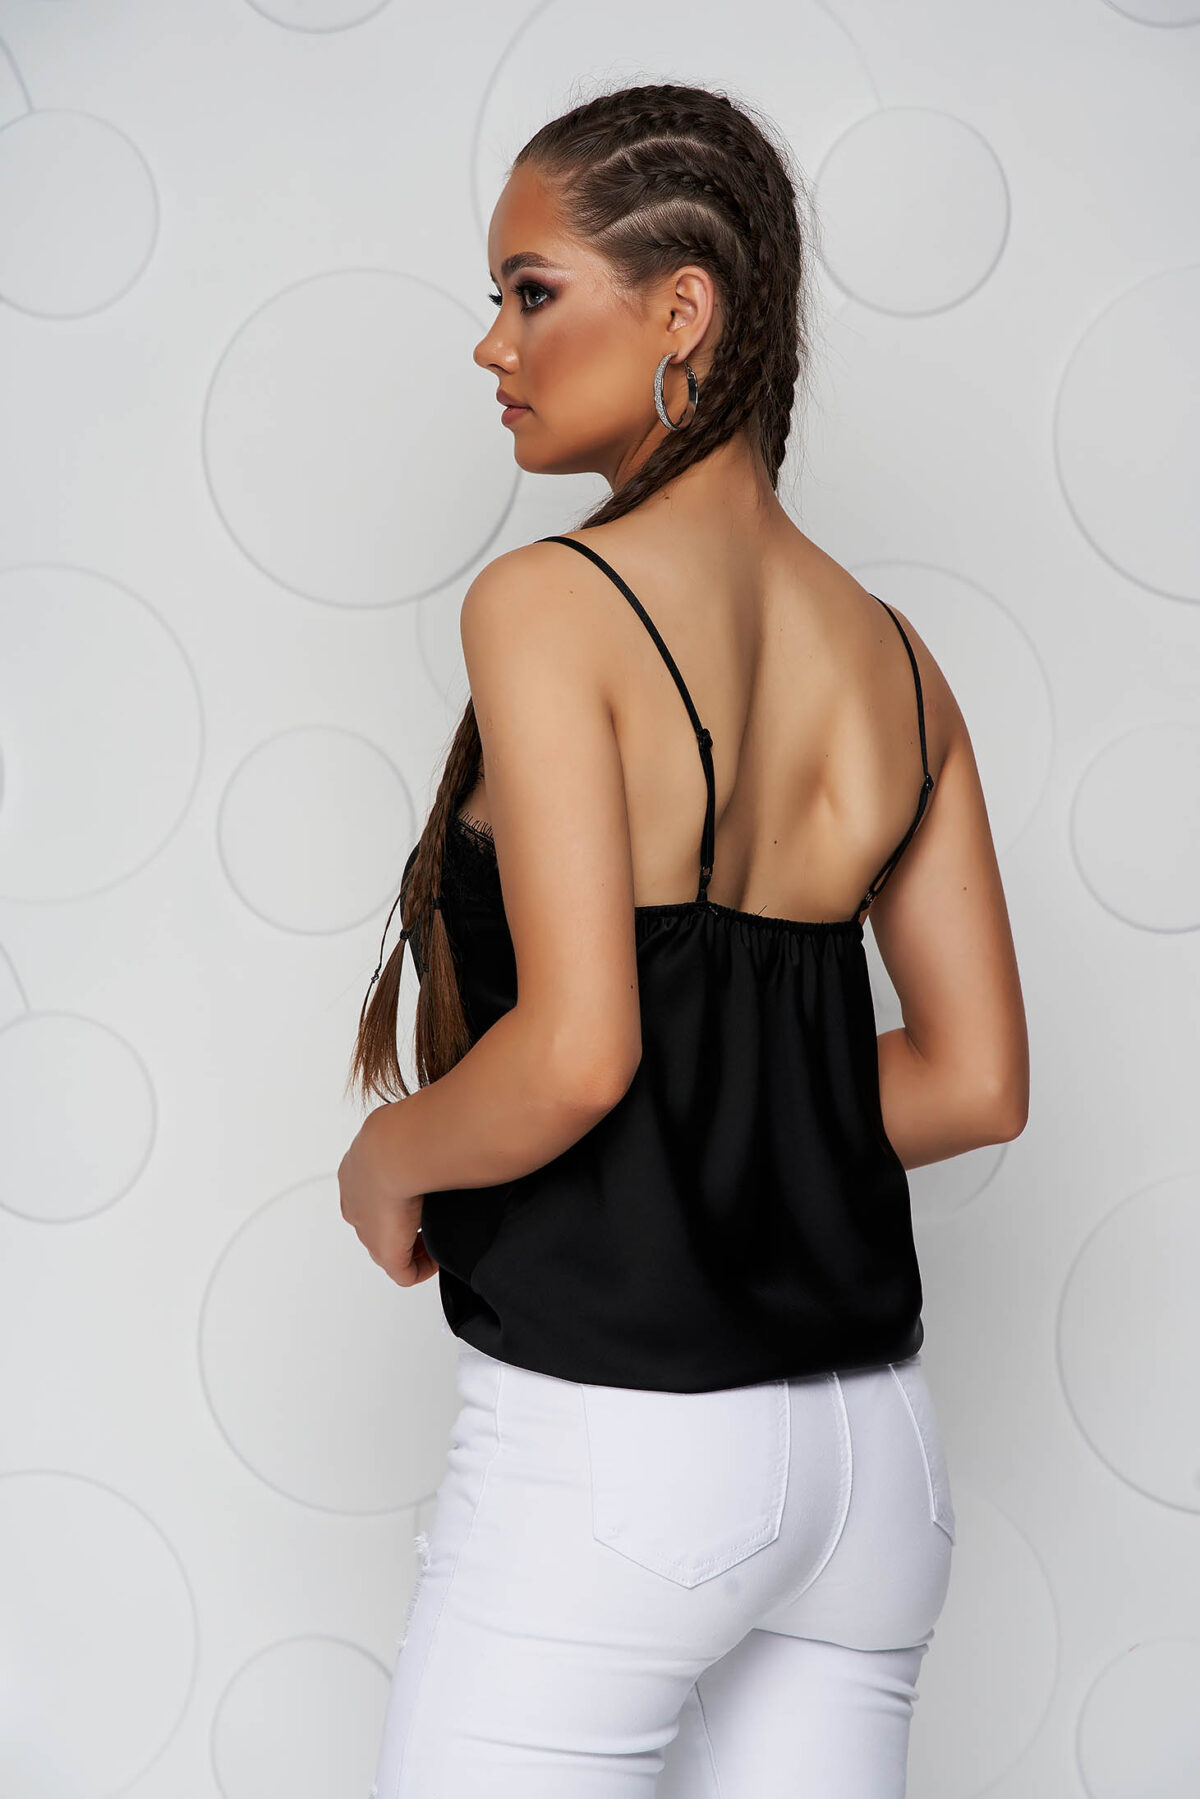 Black Top Shirt Loose Fit From Satin With Straps With Lace Details.